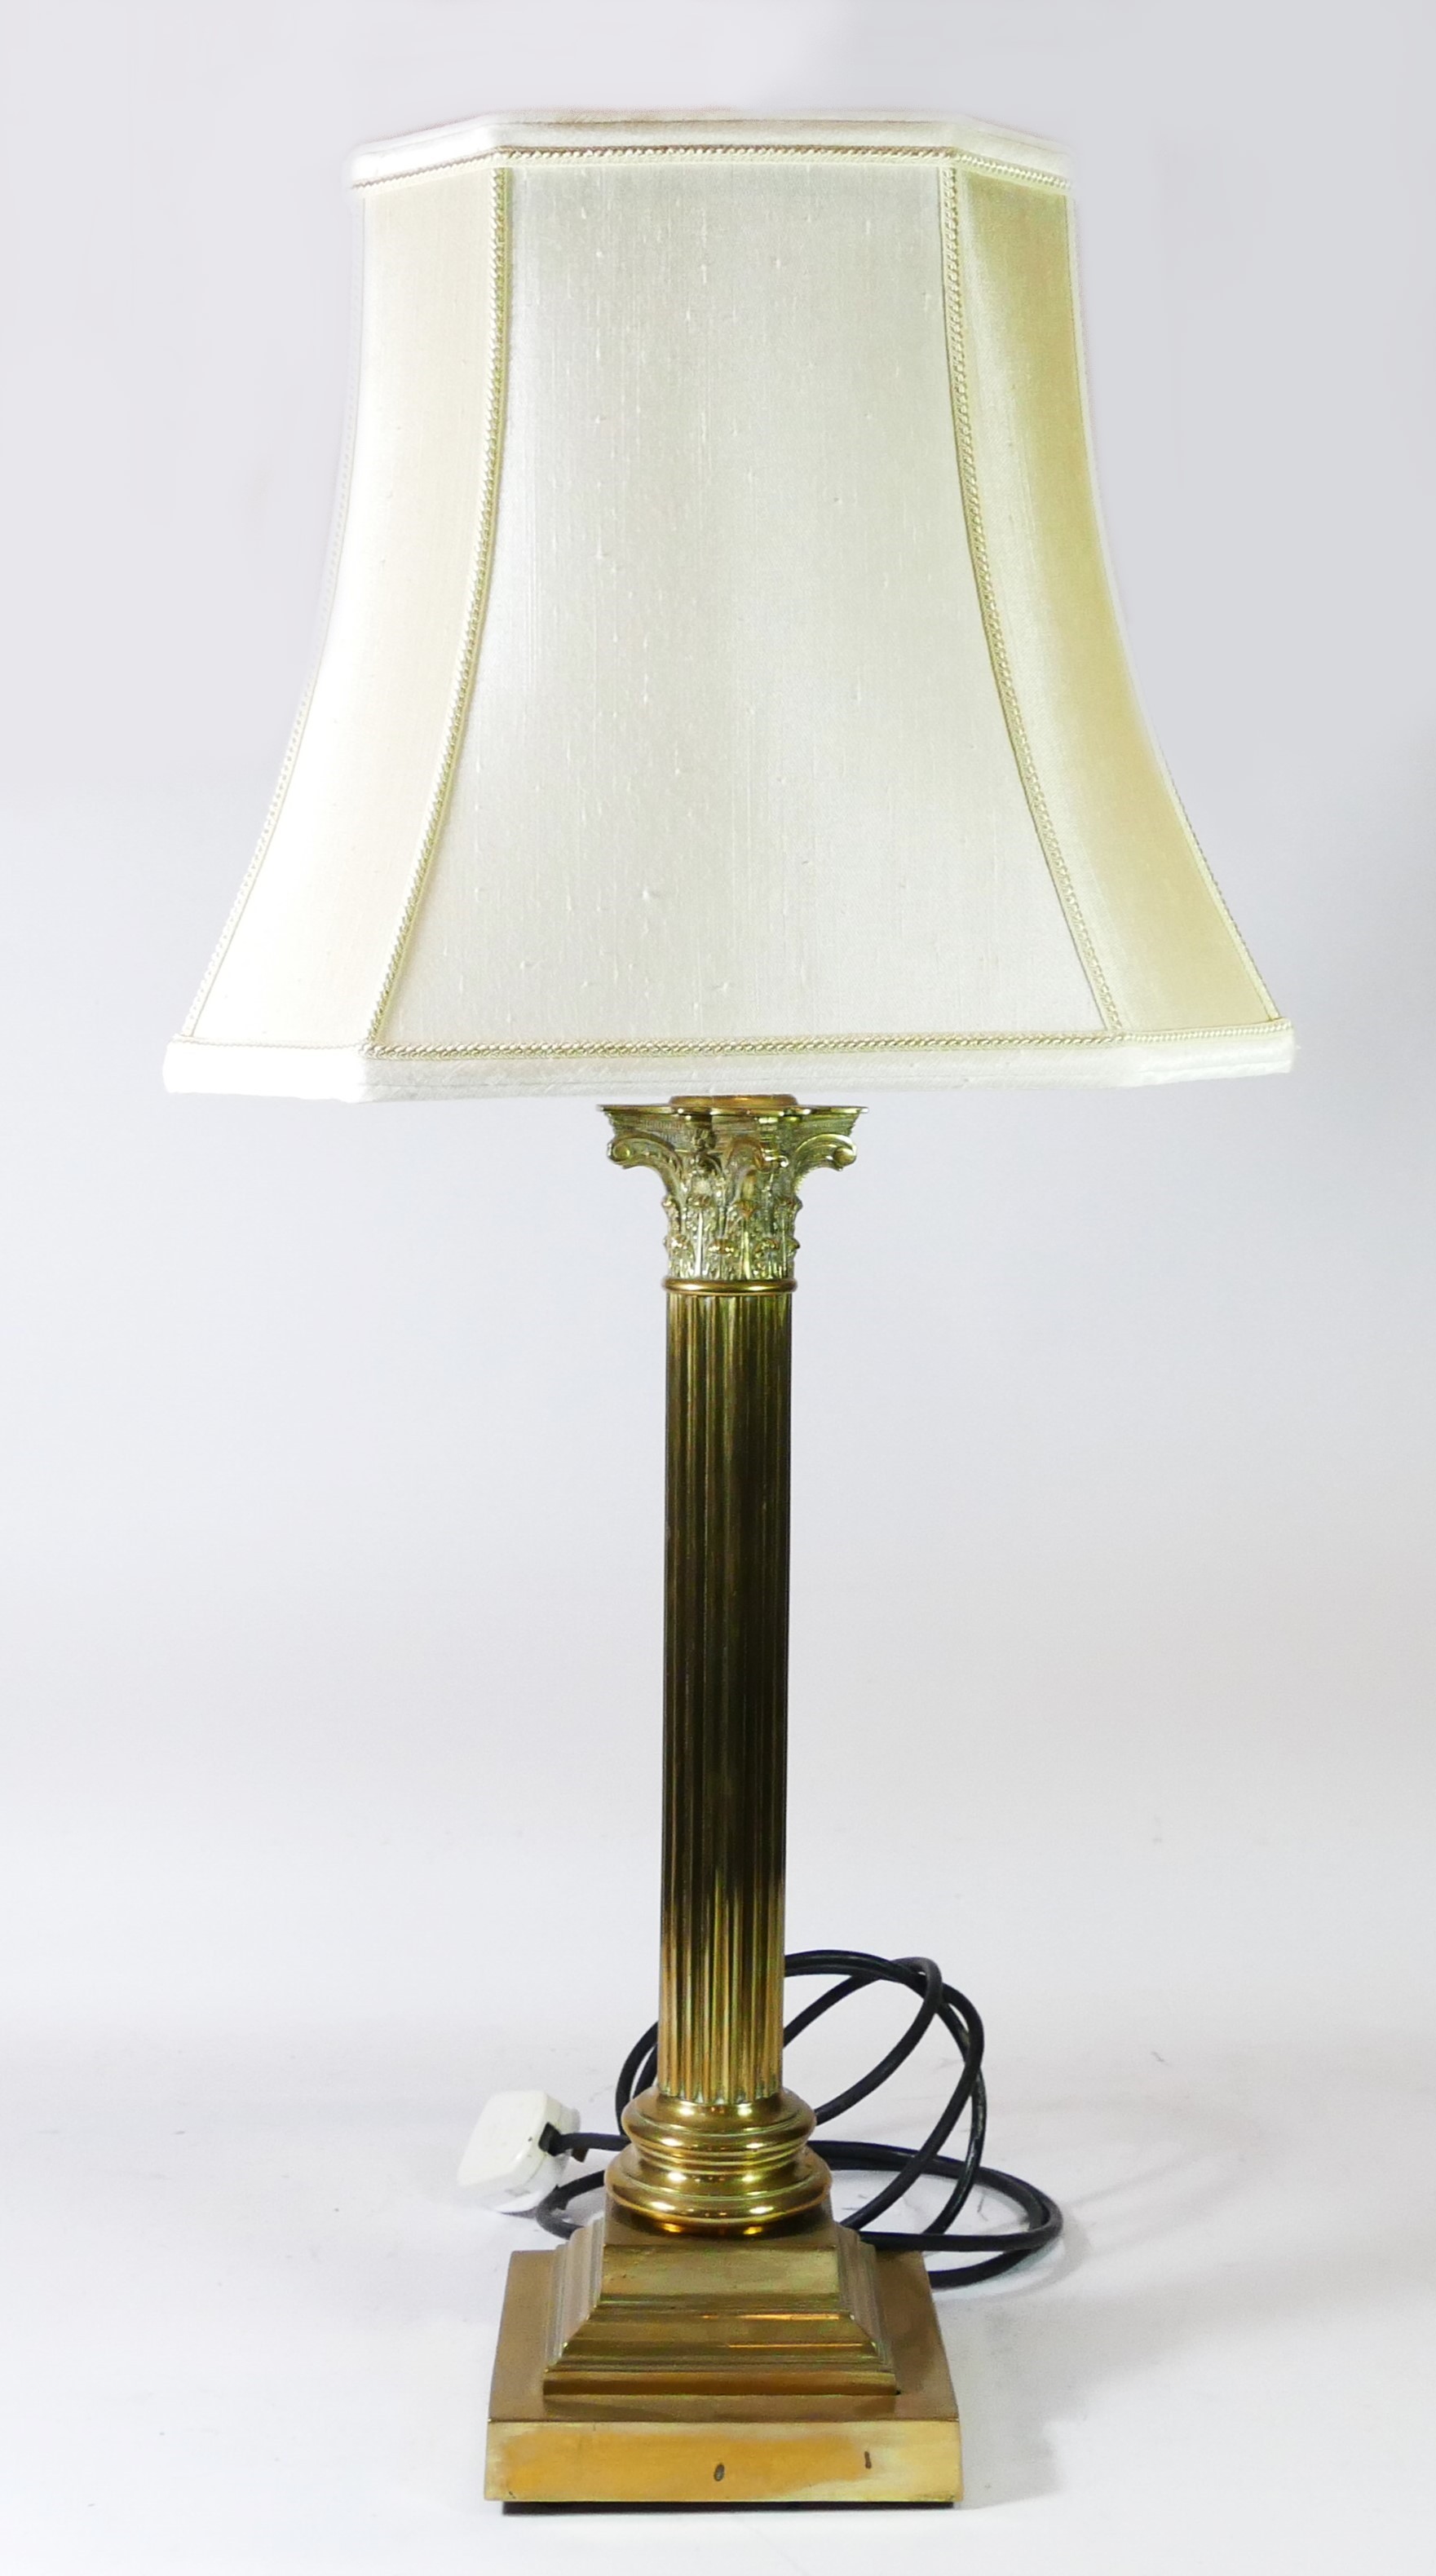 A solid brass table lamp, reeded column on a stepped base with a cream fabric shade. Overall